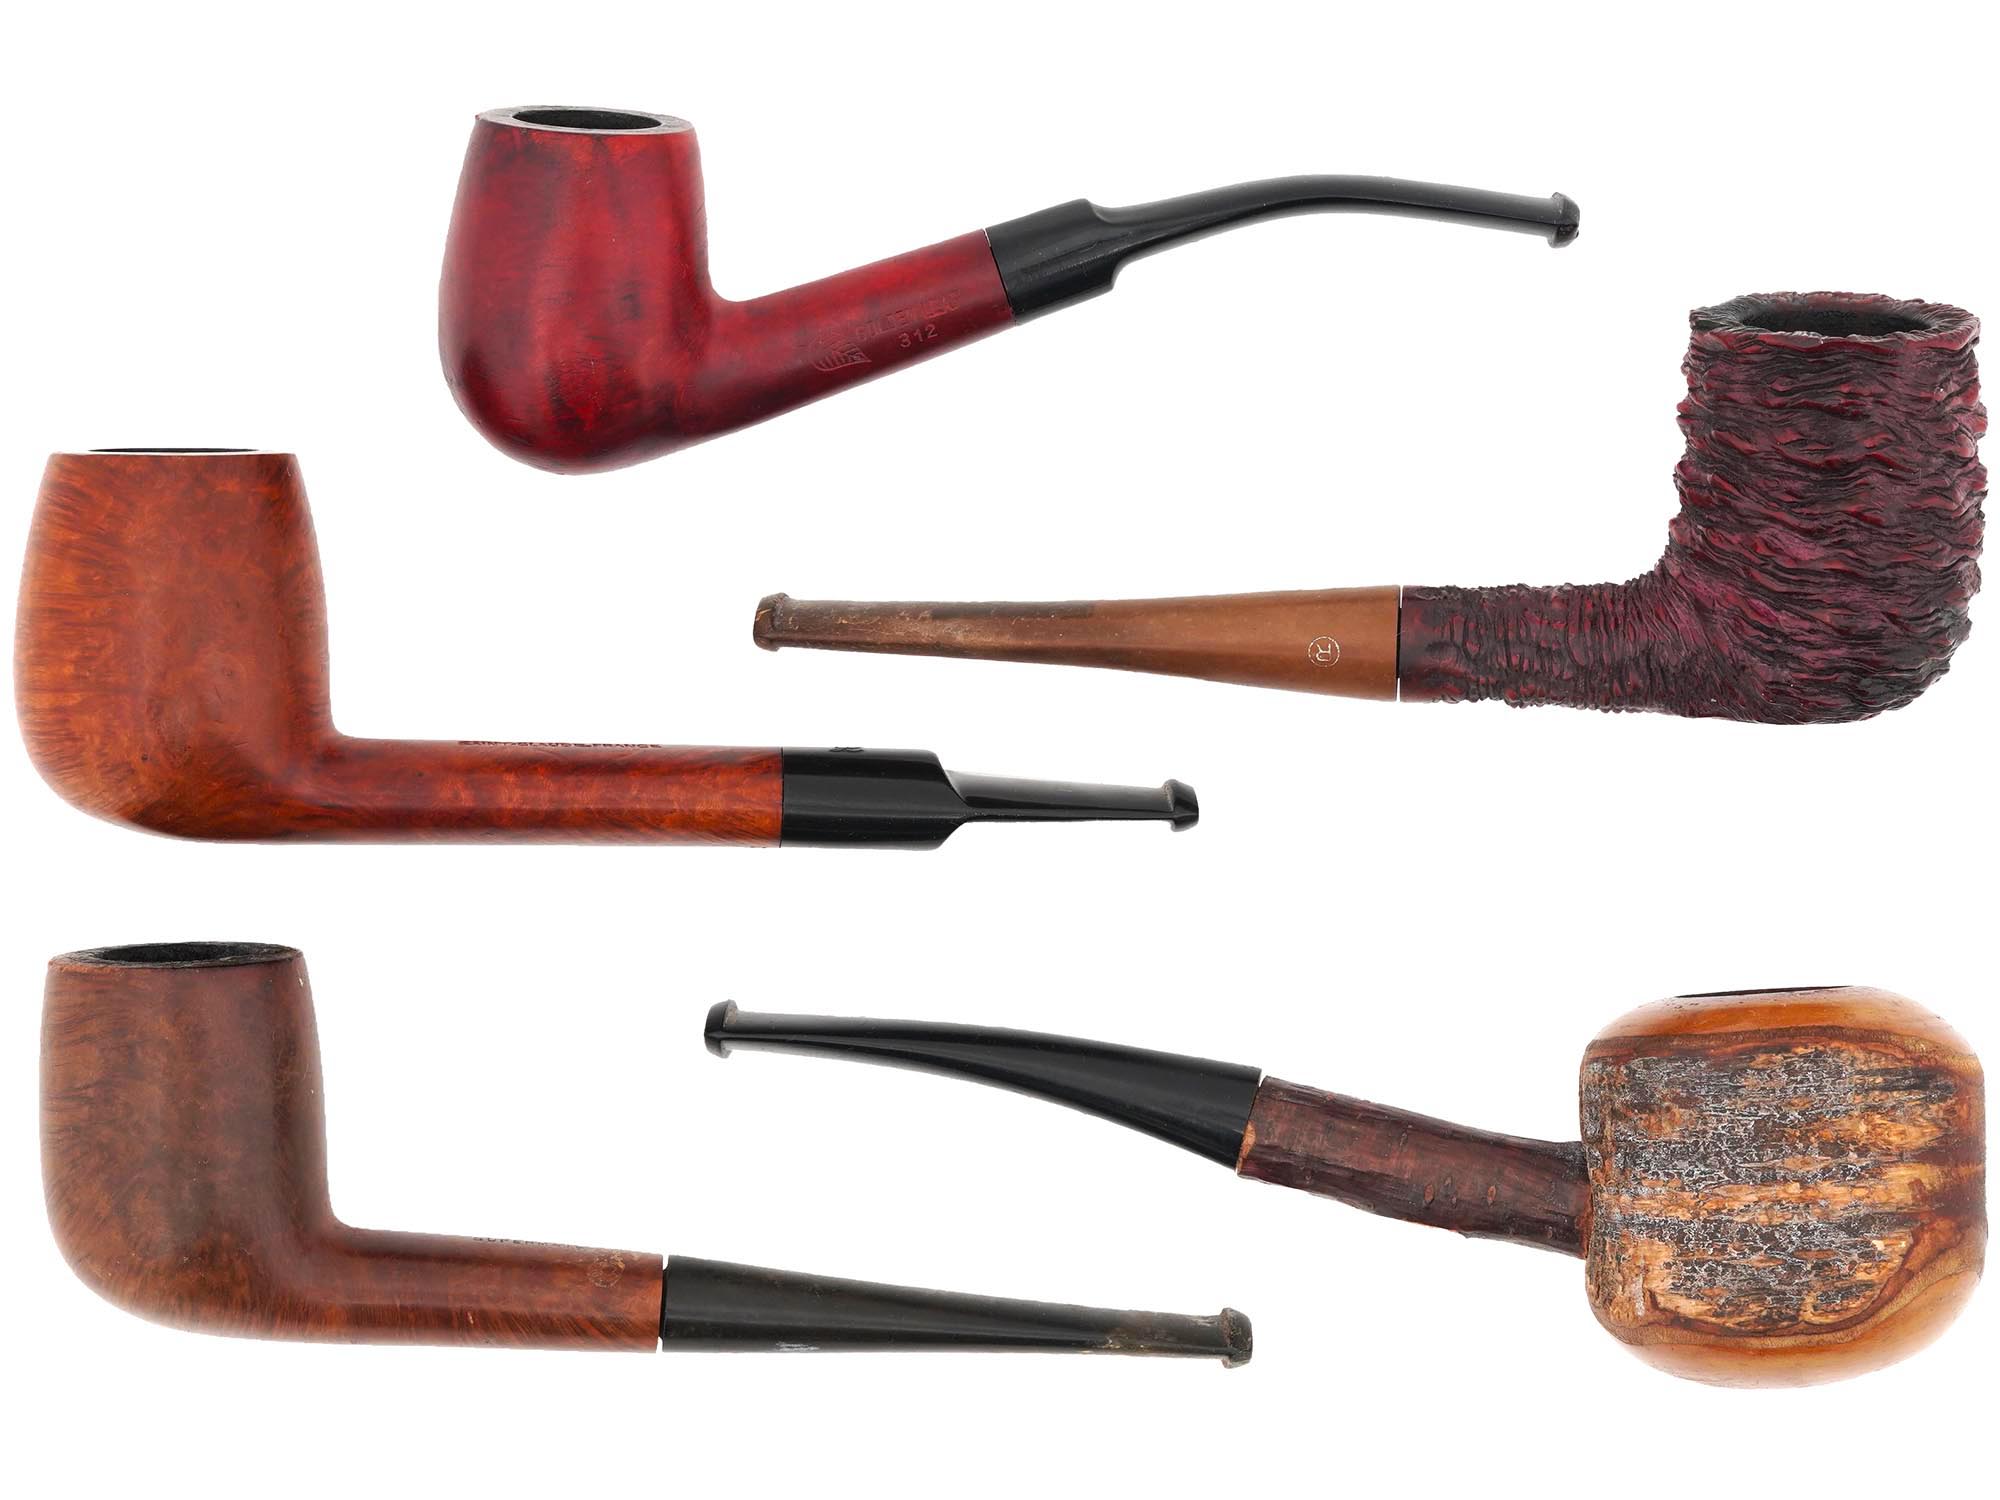 FILTERS CLEANER CARVED WOODEN TOBACCO PIPES SET PIC-3